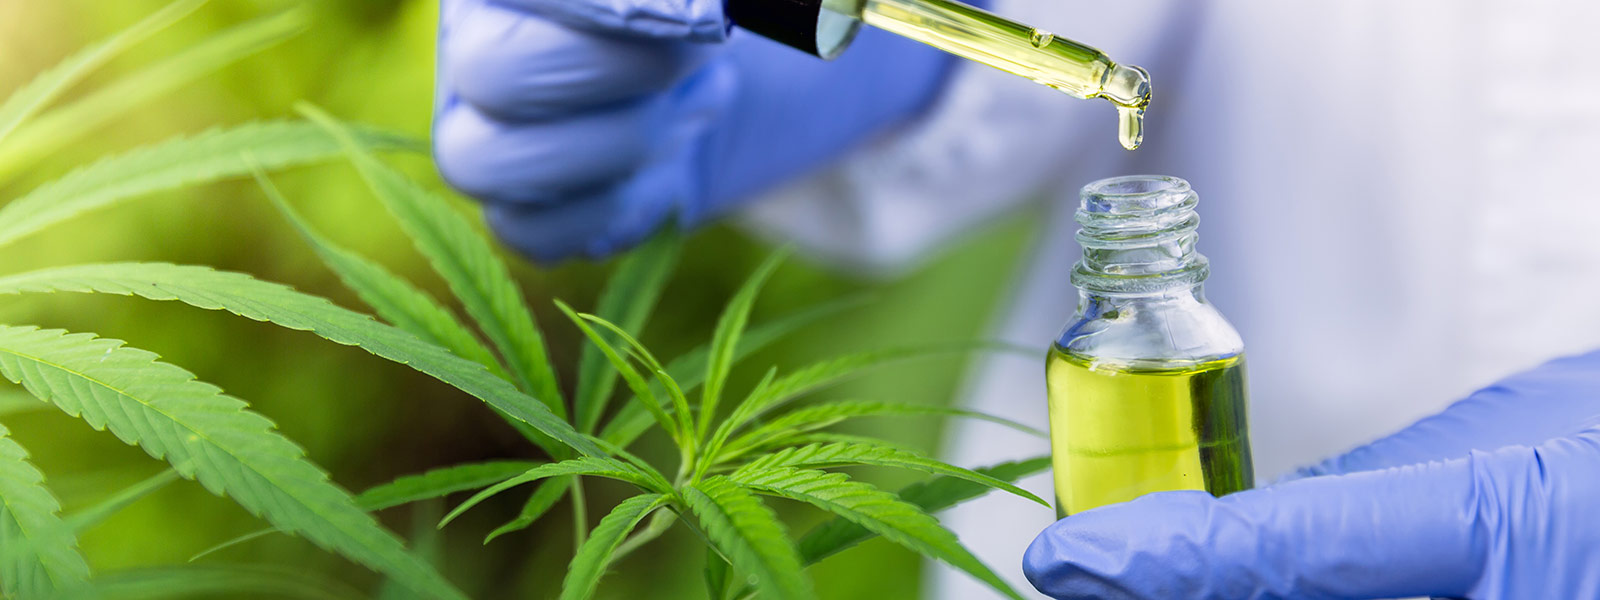 Medicinal Cannabis: Getting it right / Research Impact / Our stories / Research / The University of Newcastle, Australia